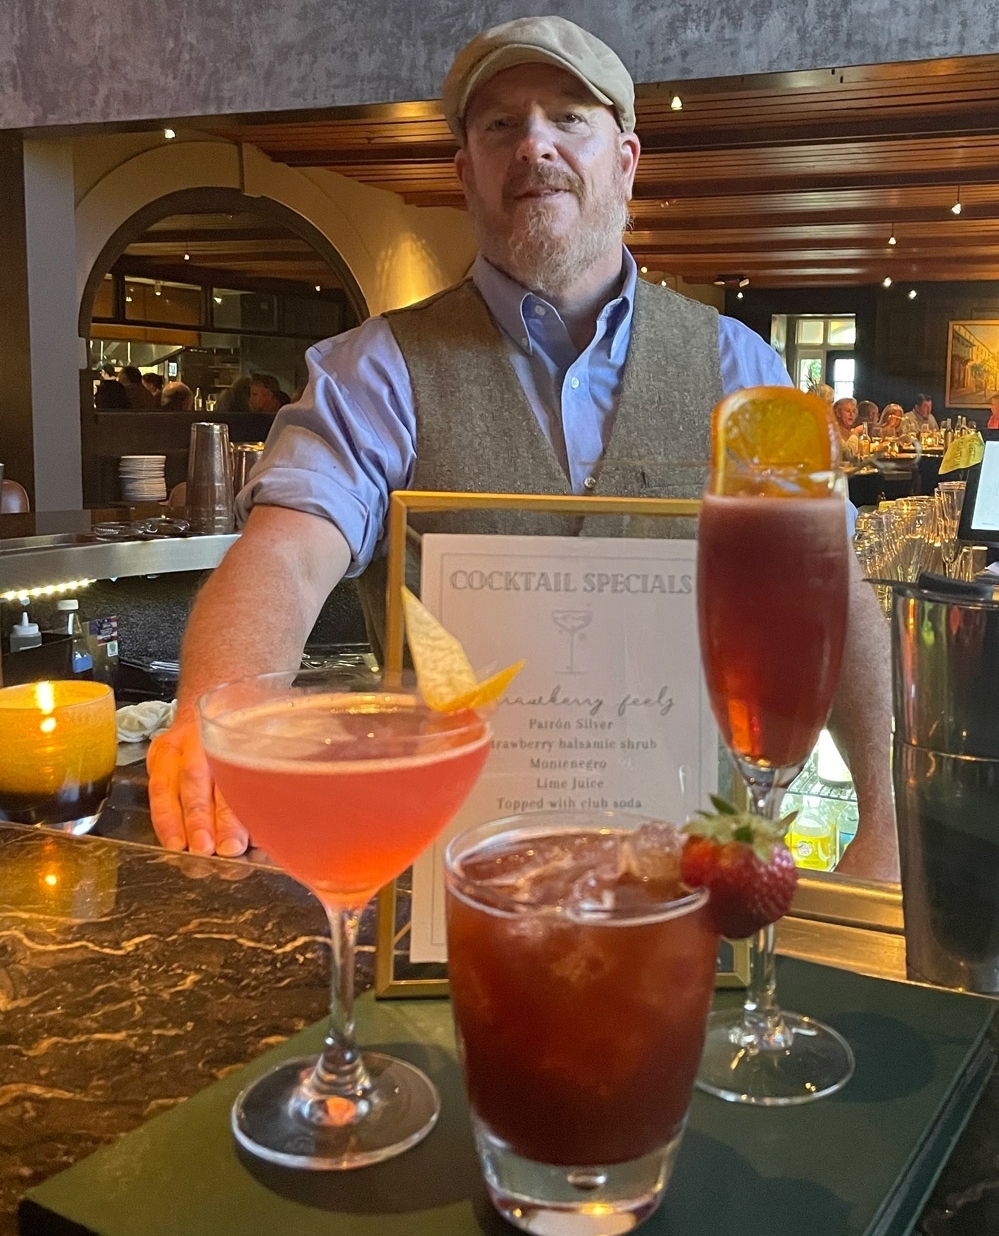 Who's that making our specialty cocktails behind the bar tonight? Mr Ryan Wise - Bar Manager and Maestro of Mixology! Come see him tonight and / or tomorrow for a classic drink and a wonderful smile ;)⁠
.⁠
.⁠
.⁠
#chsdrinks #southofbroad #bartenders #mixology #cocktails #charleston